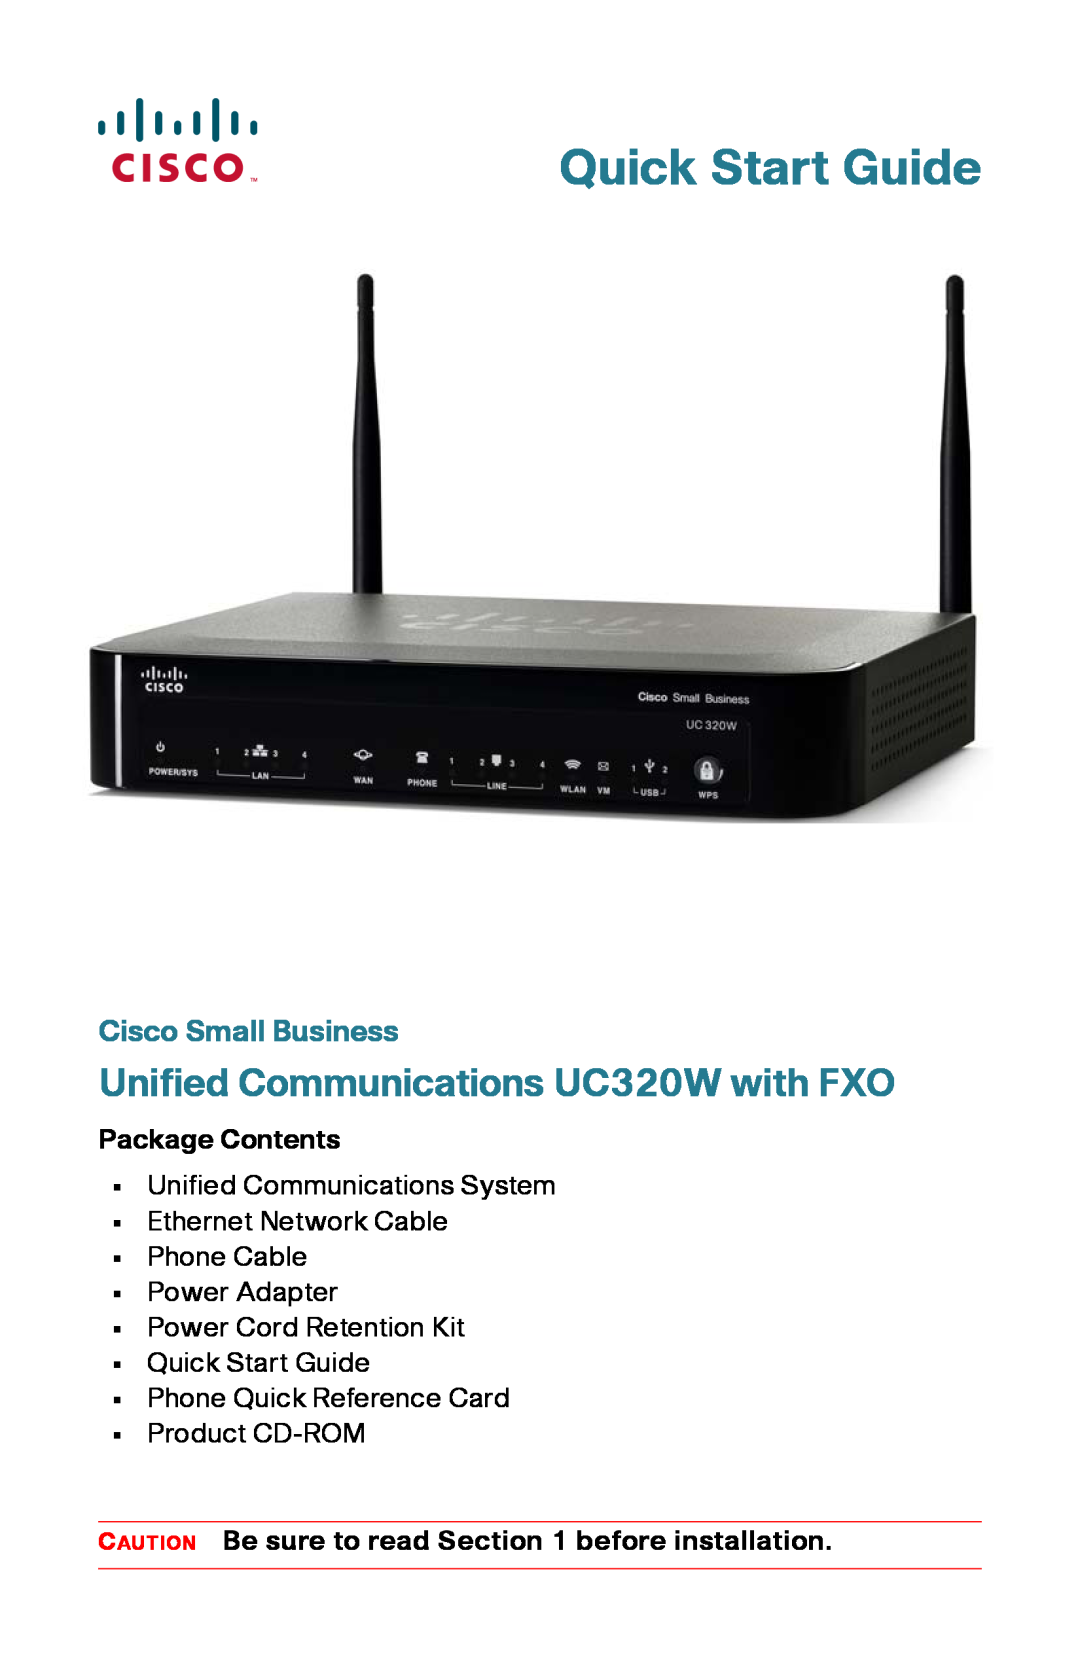 Cisco Systems quick start Cisco Small Business, Quick Start Guide, Unified Communications UC320W with FXO 